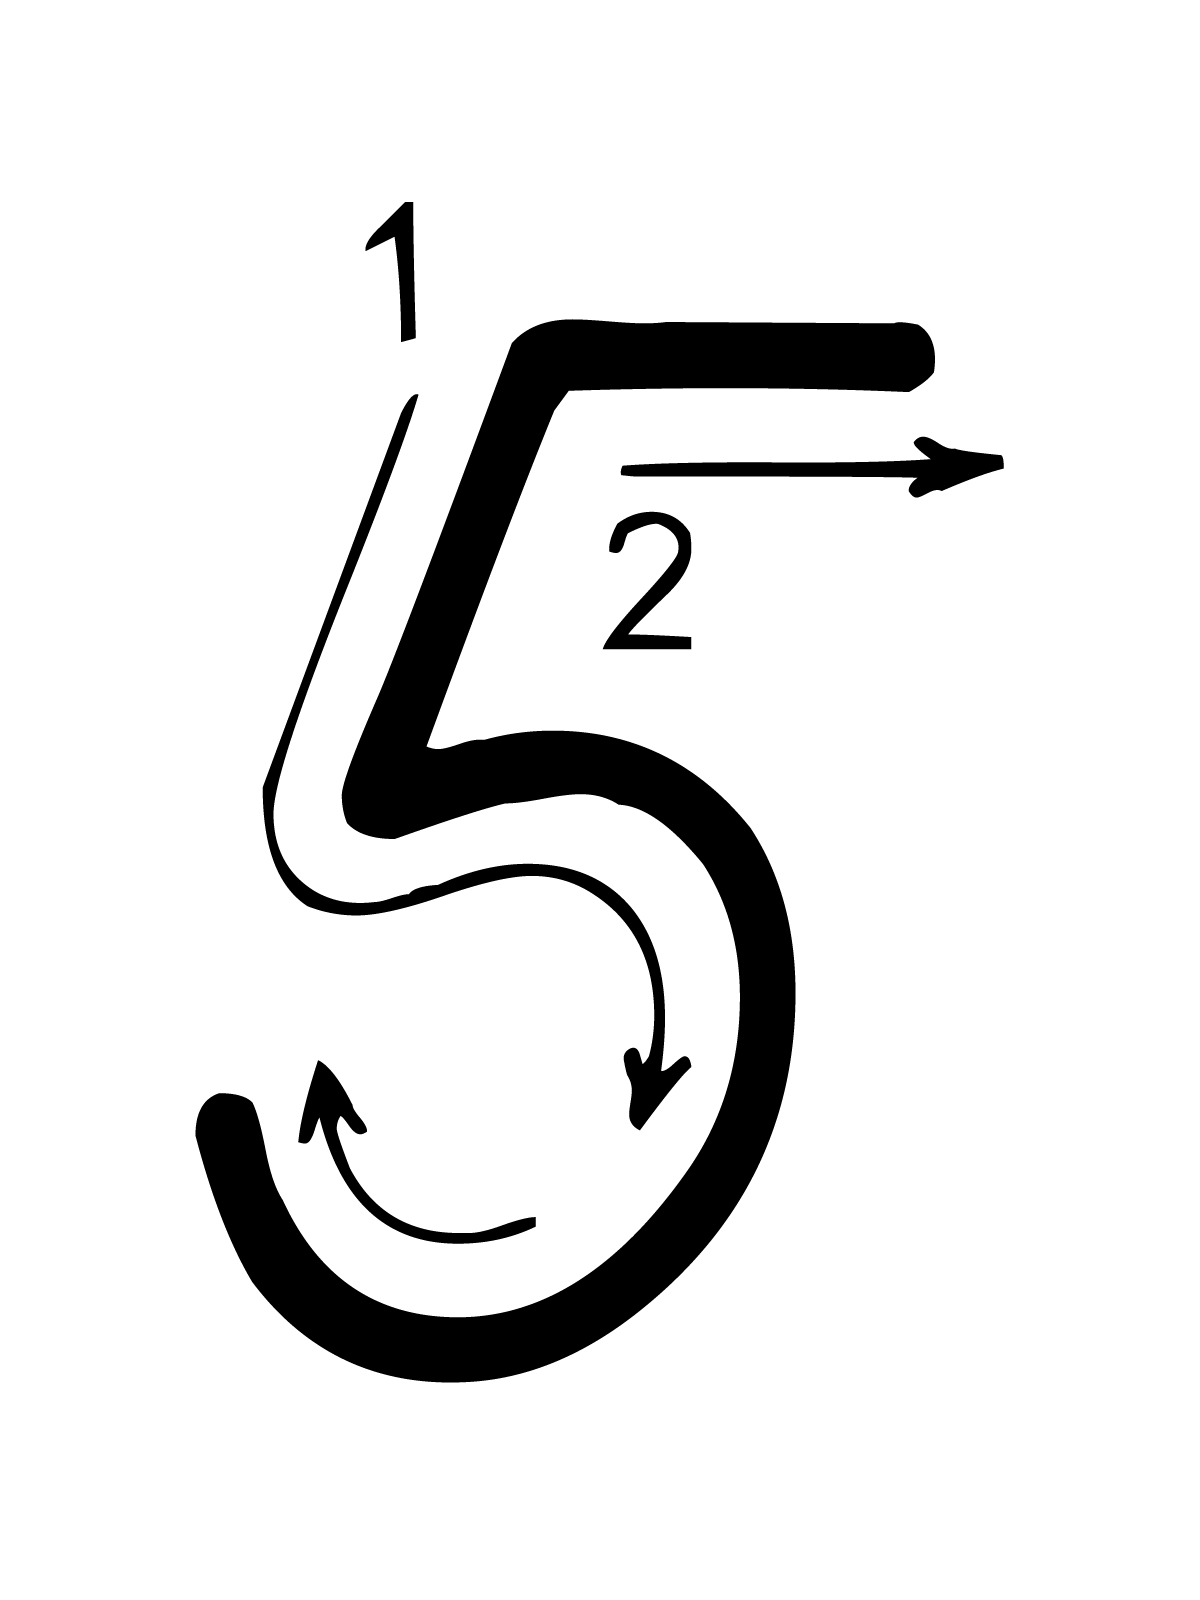 Letters and numbers - Number 5 (five) with indications cursive movement